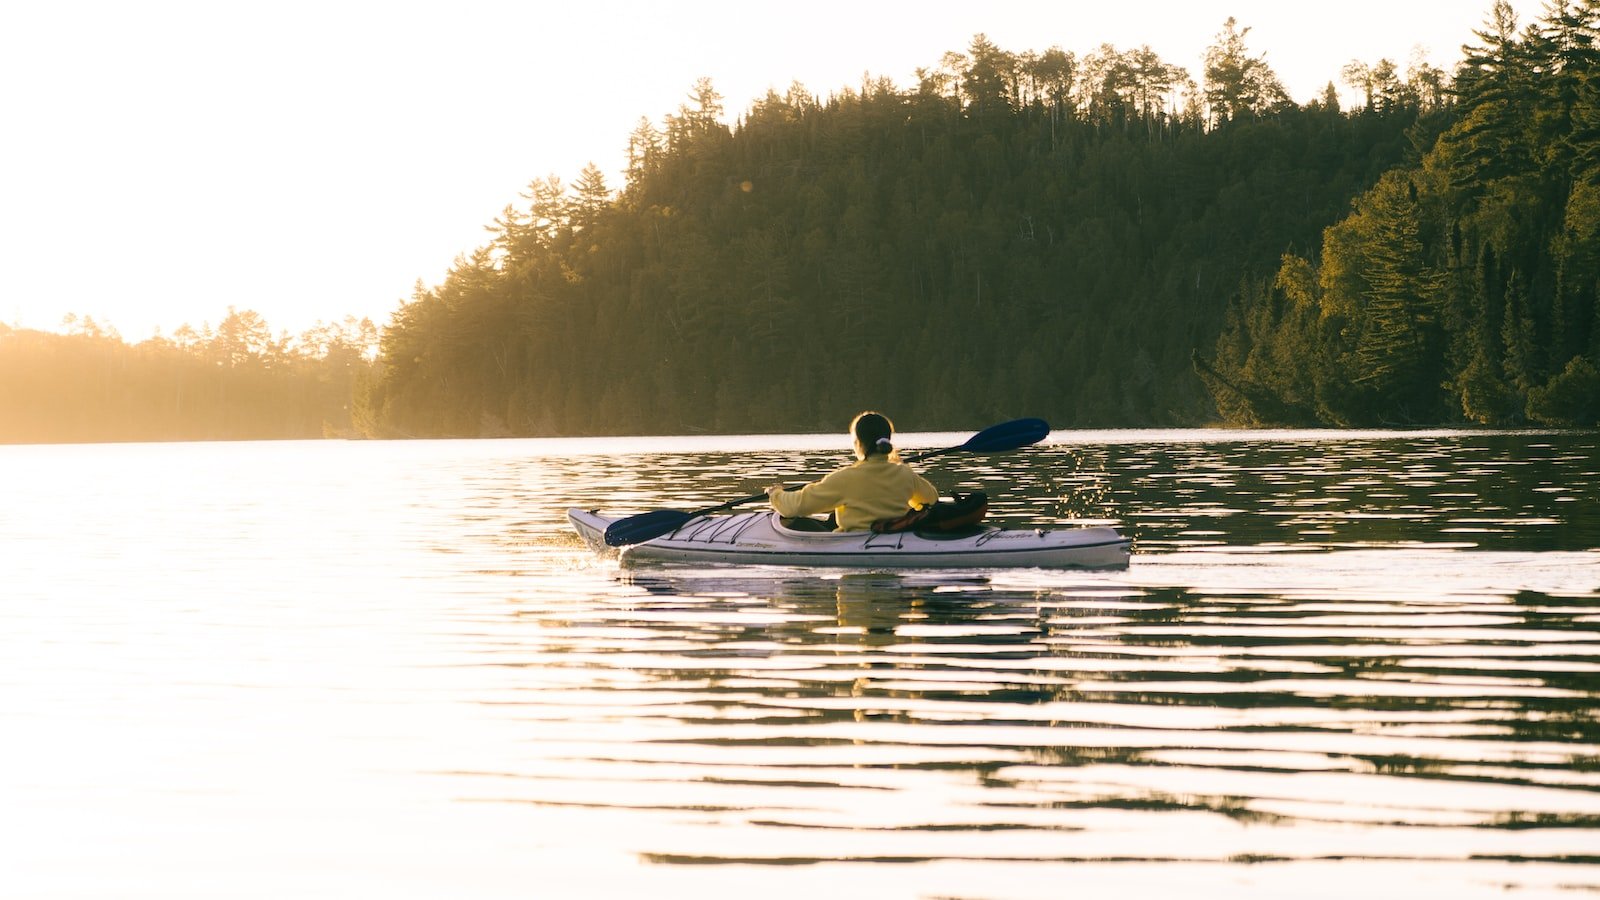 Choosing the​ Right Materials and Design for Your‍ Wilderness Kayak